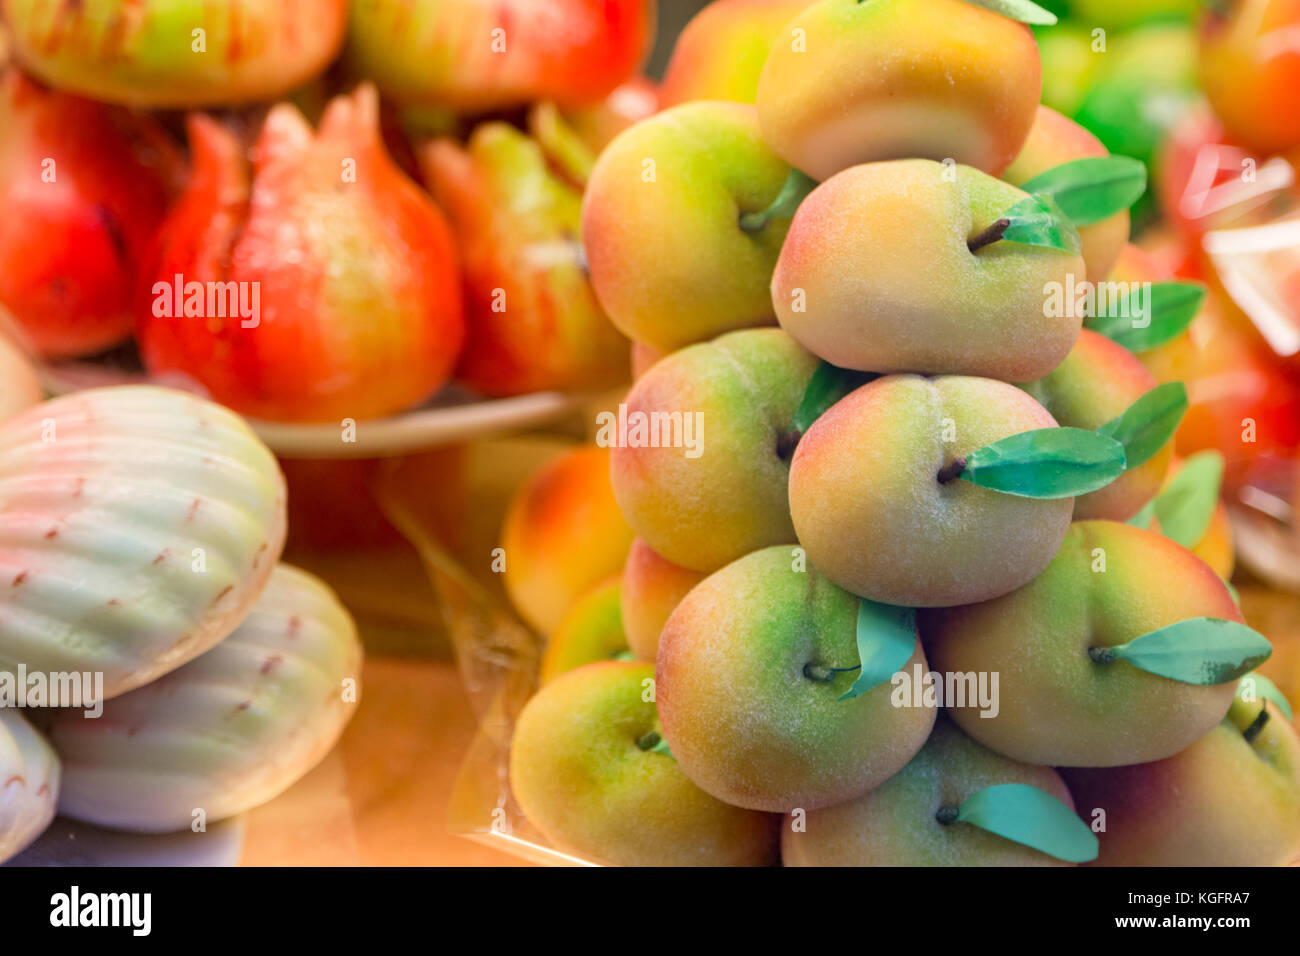 Cakes with marzipan in the form of peach. Stock Photo